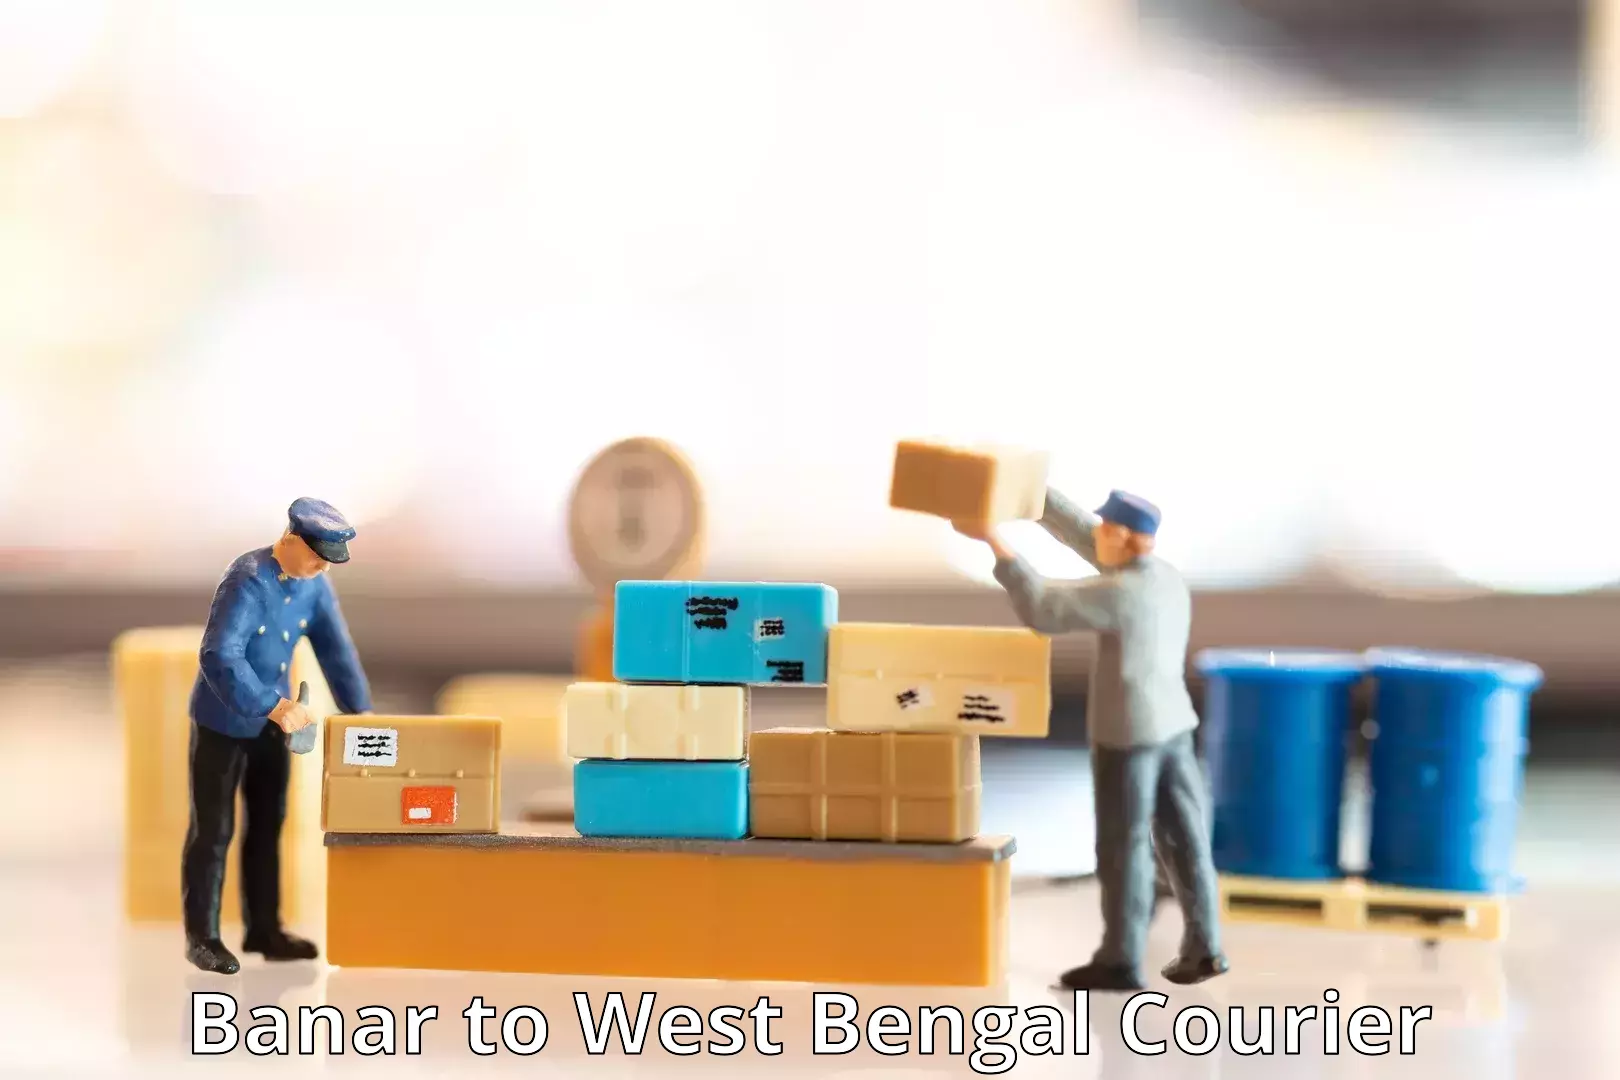 Global courier networks Banar to West Bengal